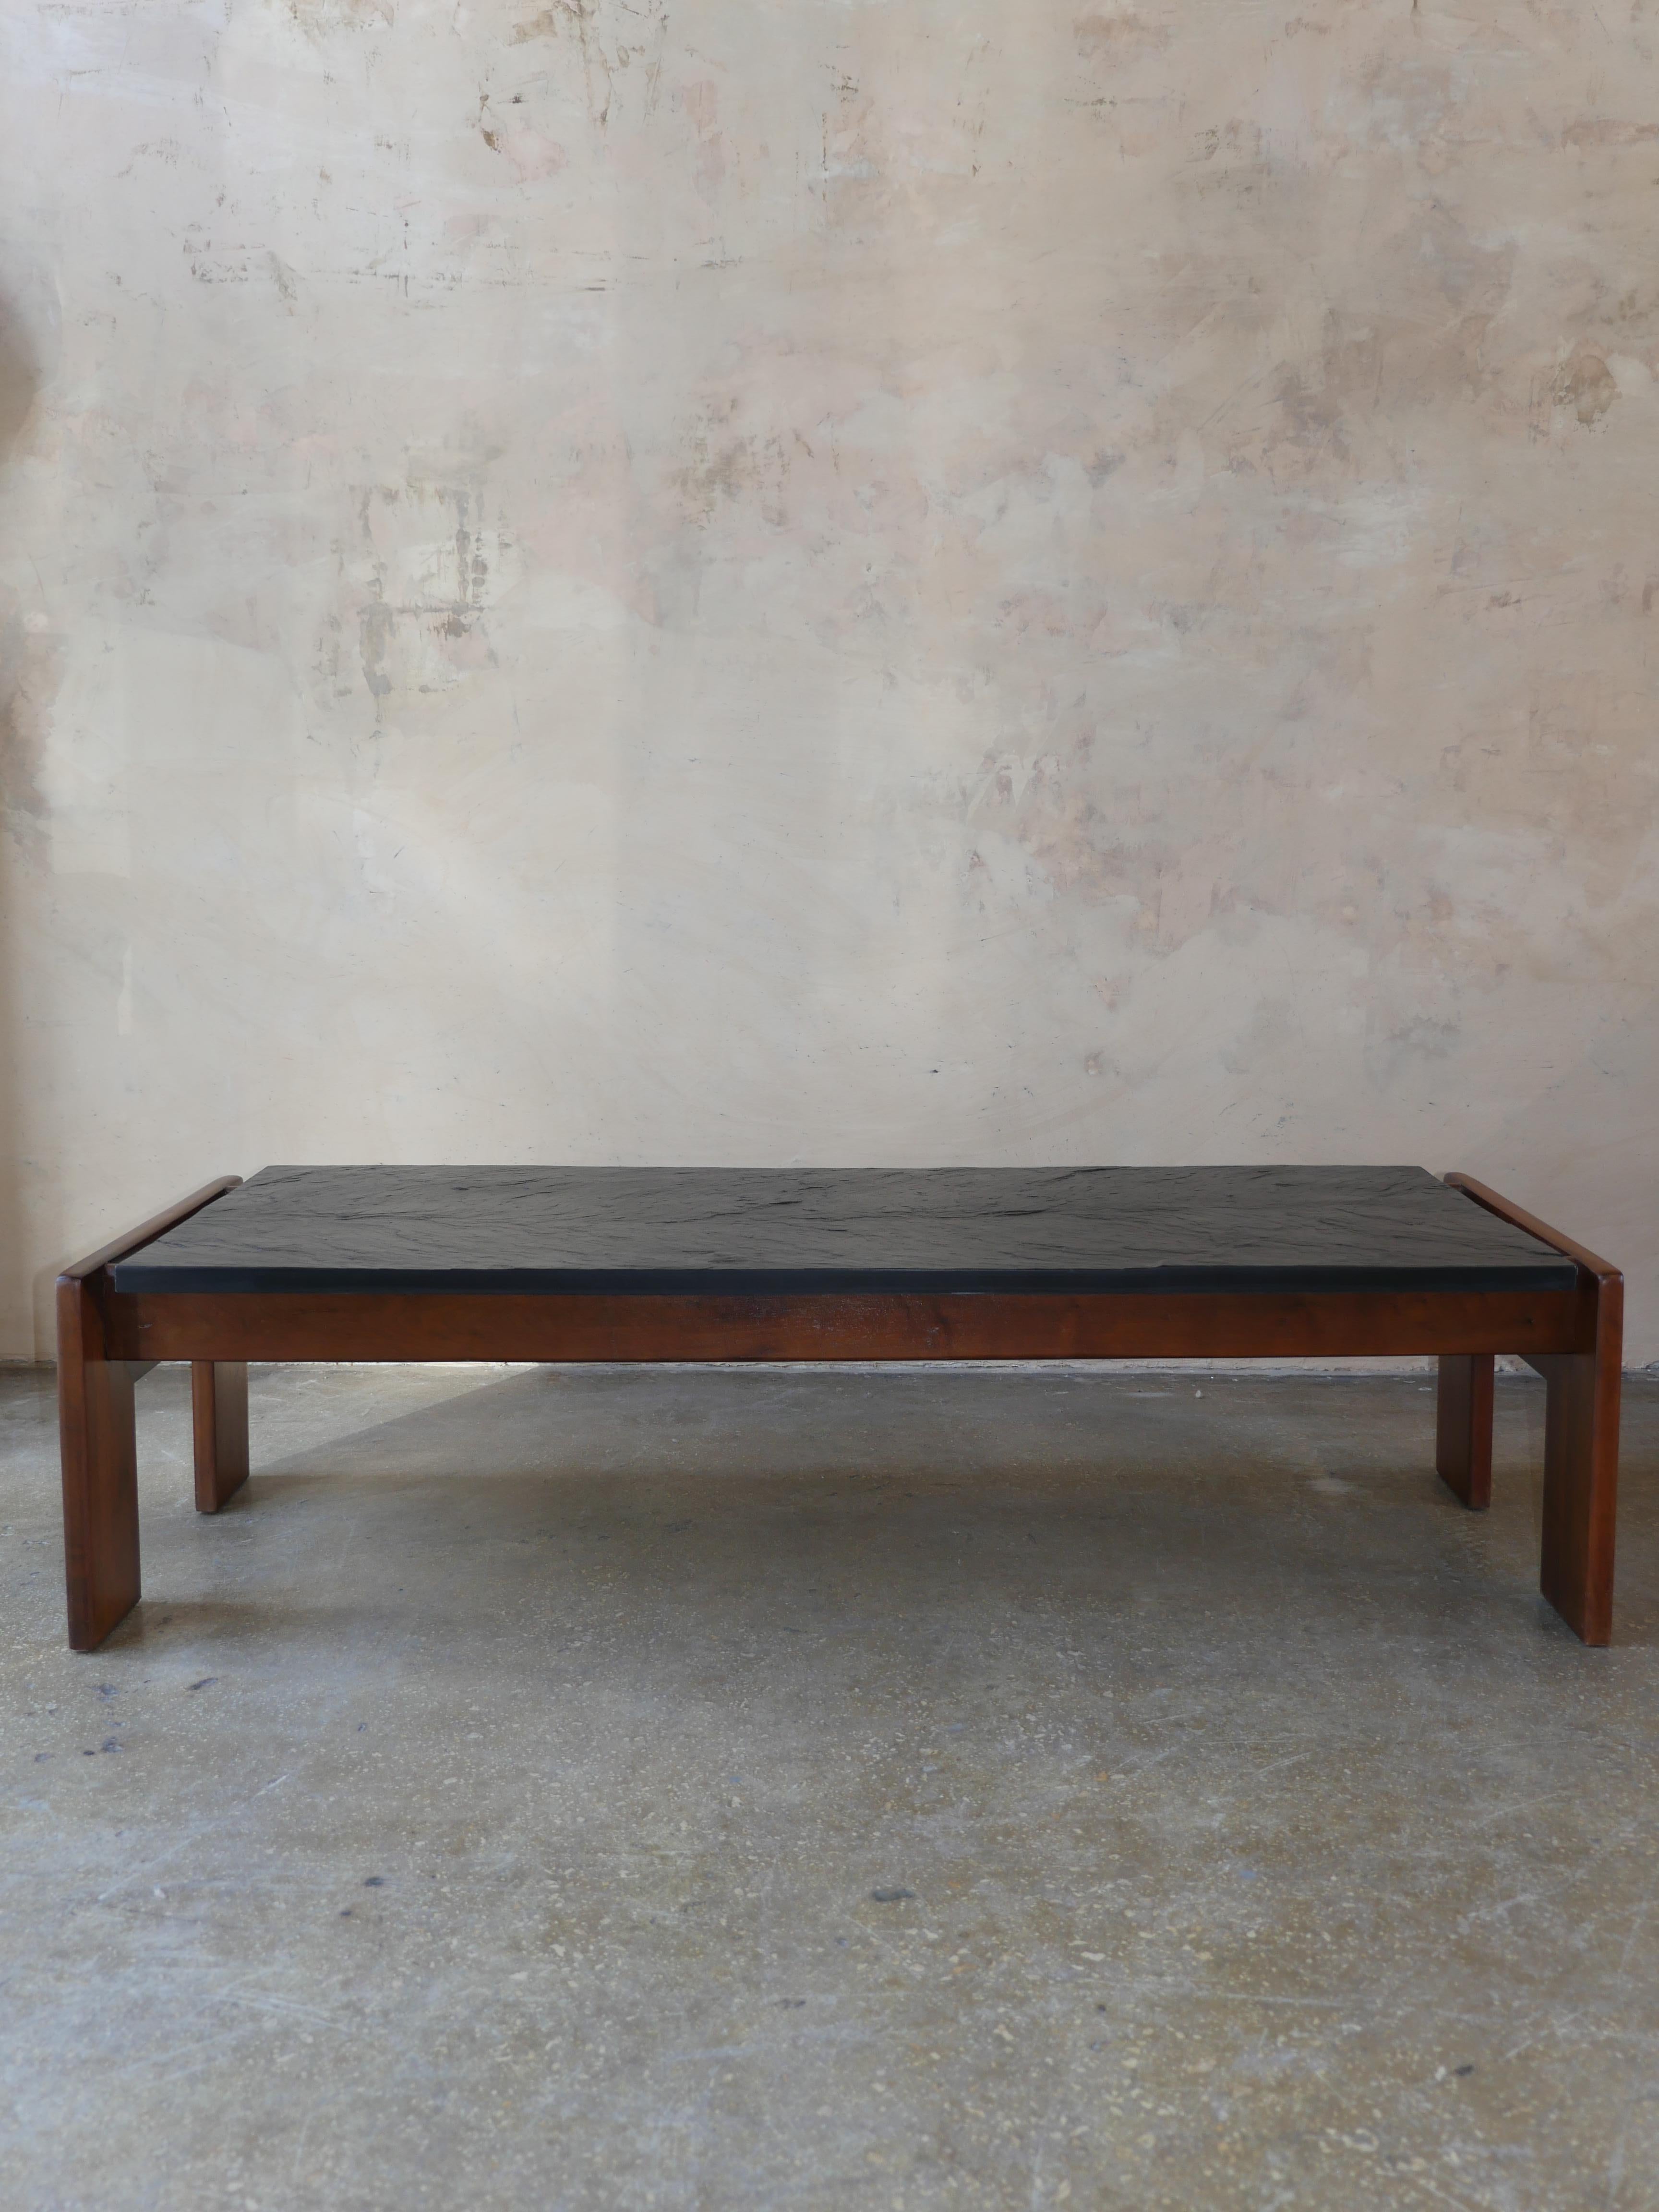 1960s vintage slate and walnut mid-century coffee table, often attributed to Adrian Pearsall and Phillip Lloyd Powell.